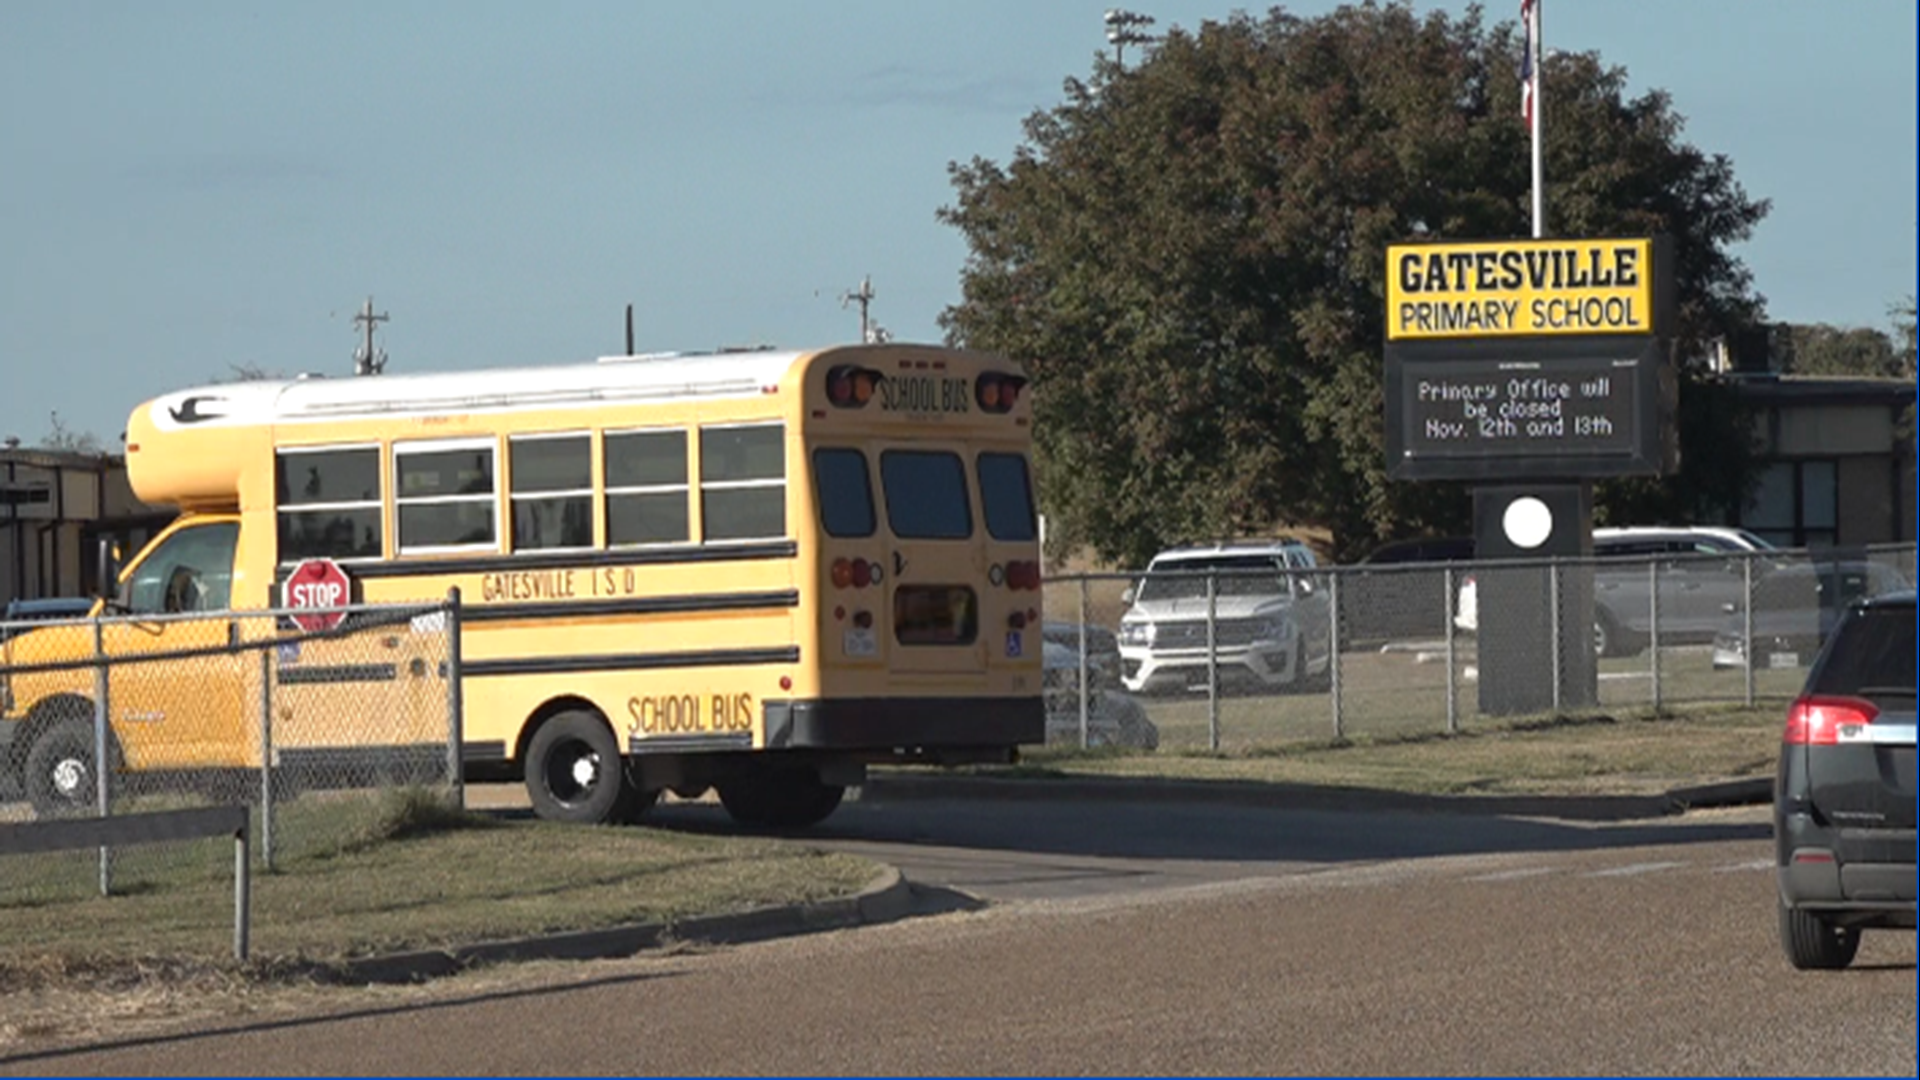 Gatesville ISD has seen 31 cases of COVID-19 since the beginning of November. Now they are shutting down to get the numbers under control.